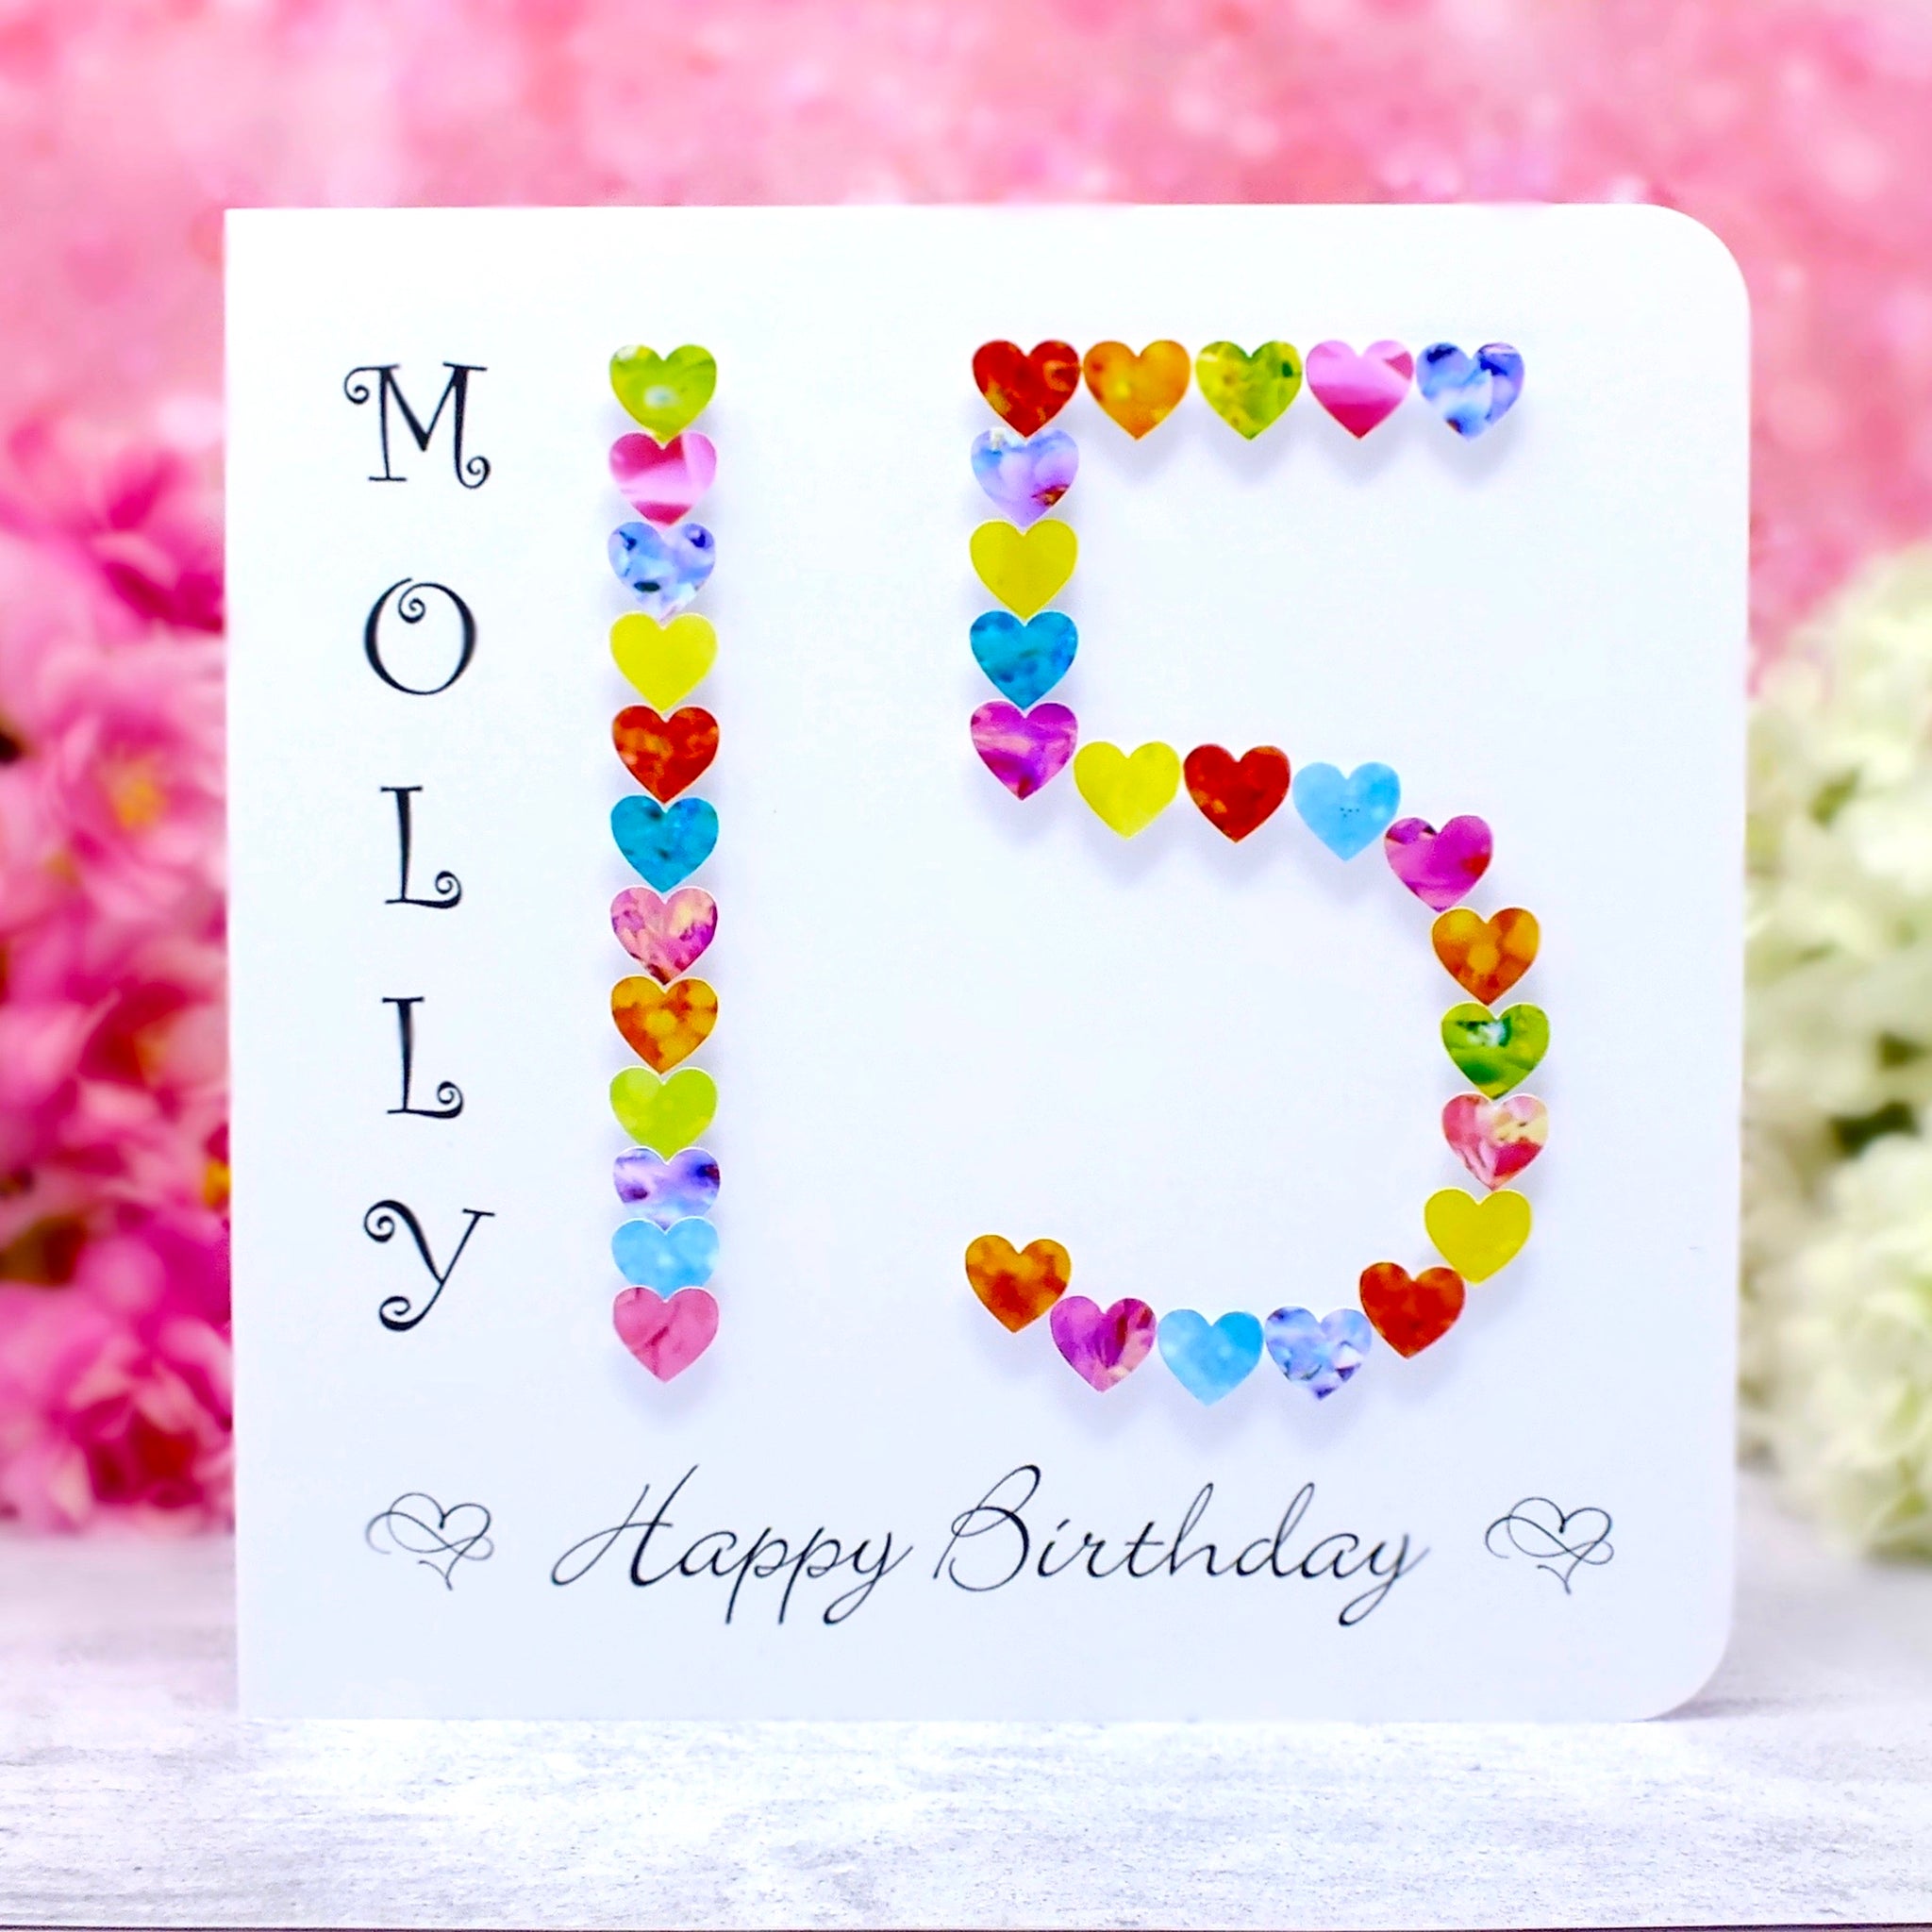 Personalized 15th Birthday Card with Vibrant Hearts - Handmade and Unique | Bright Heart Design